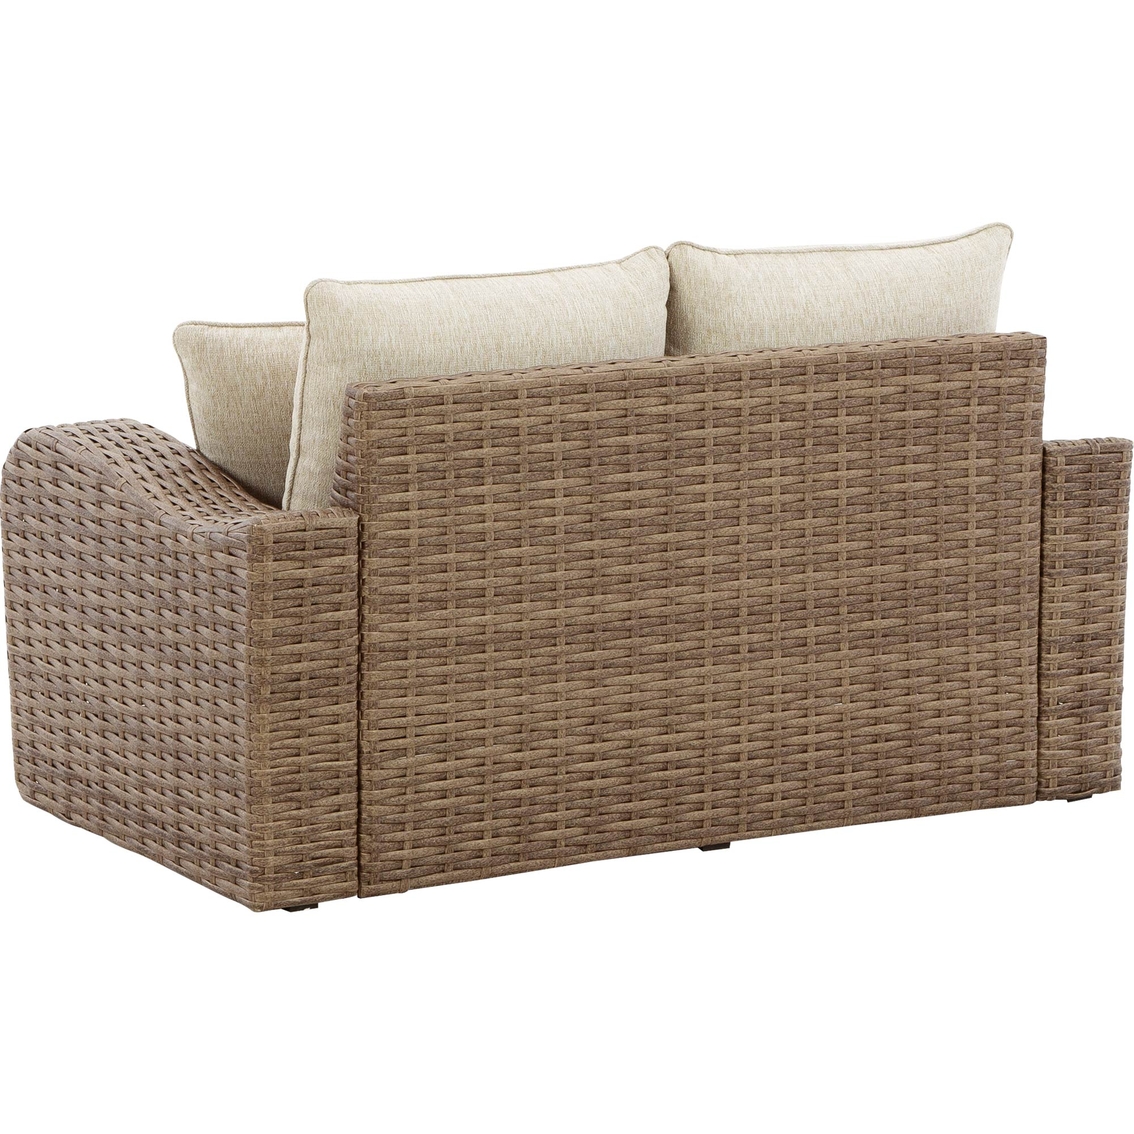 Signature Design by Ashley Sandy Bloom Outdoor Loveseat with Cushion - Image 4 of 6